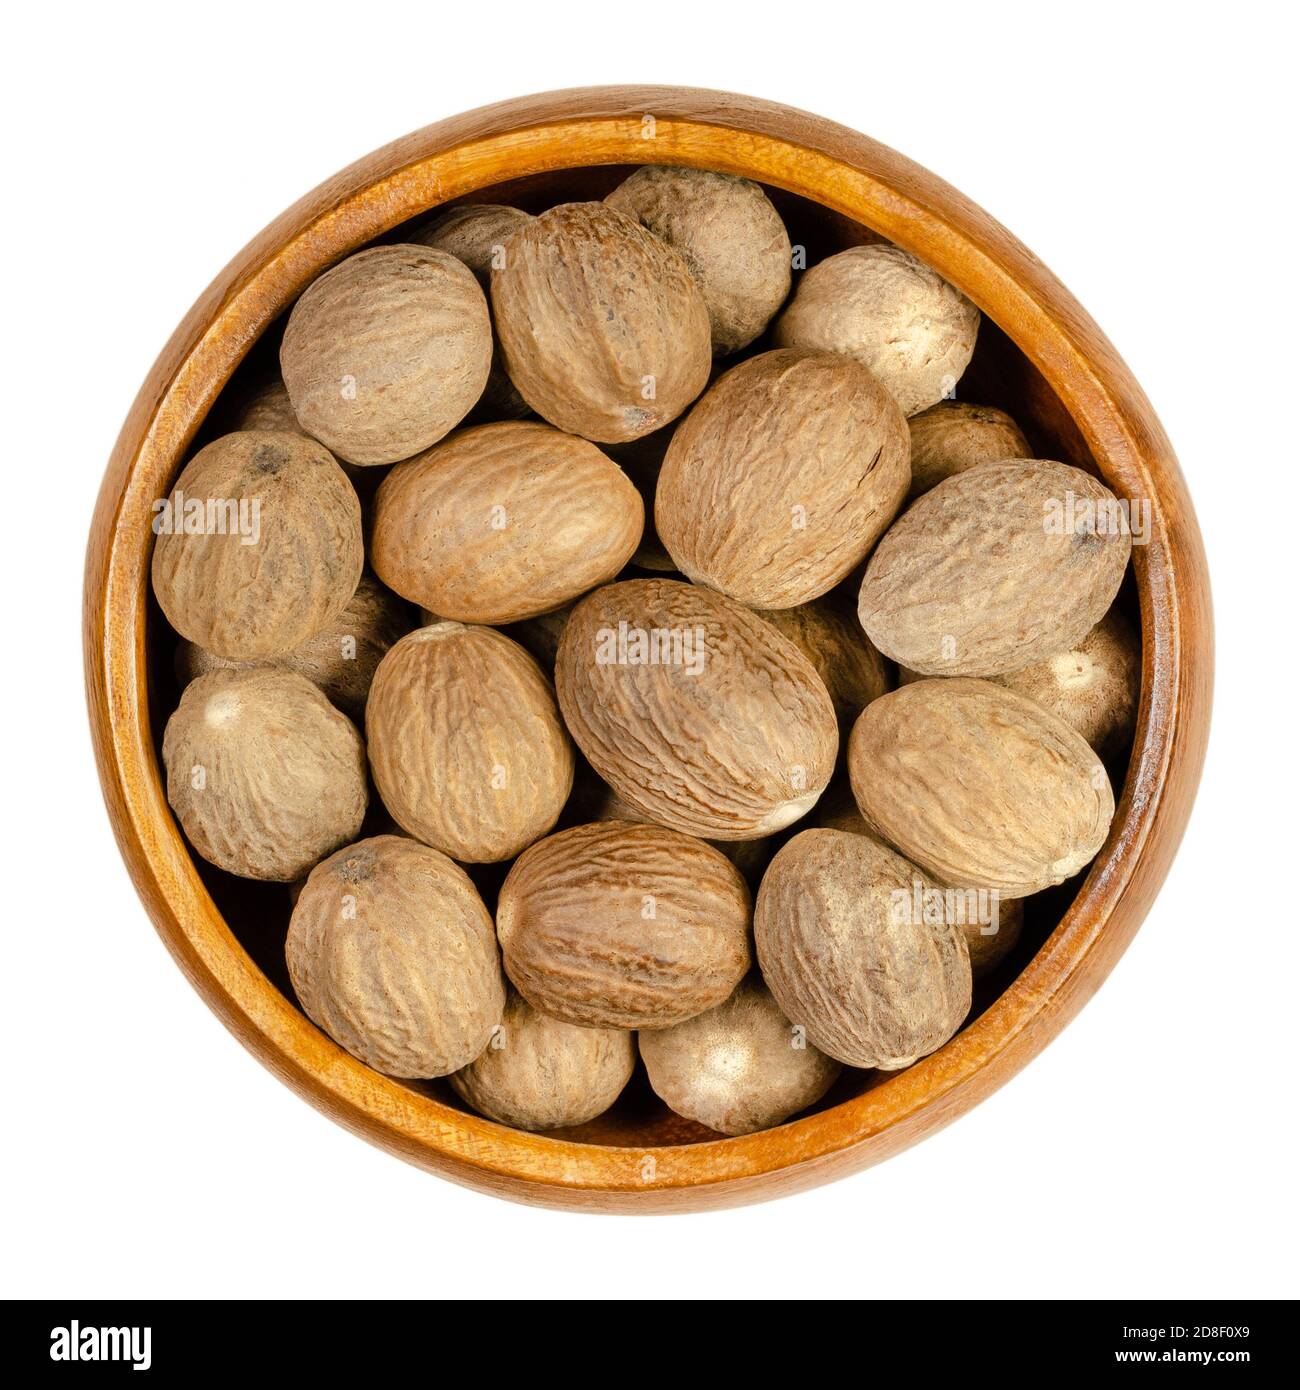 Dried whole nutmegs in a wooden bowl. Fragrant or true nutmeg, seed of Myristica fragrans with distinctive pungent fragrance, used as spice. Stock Photo